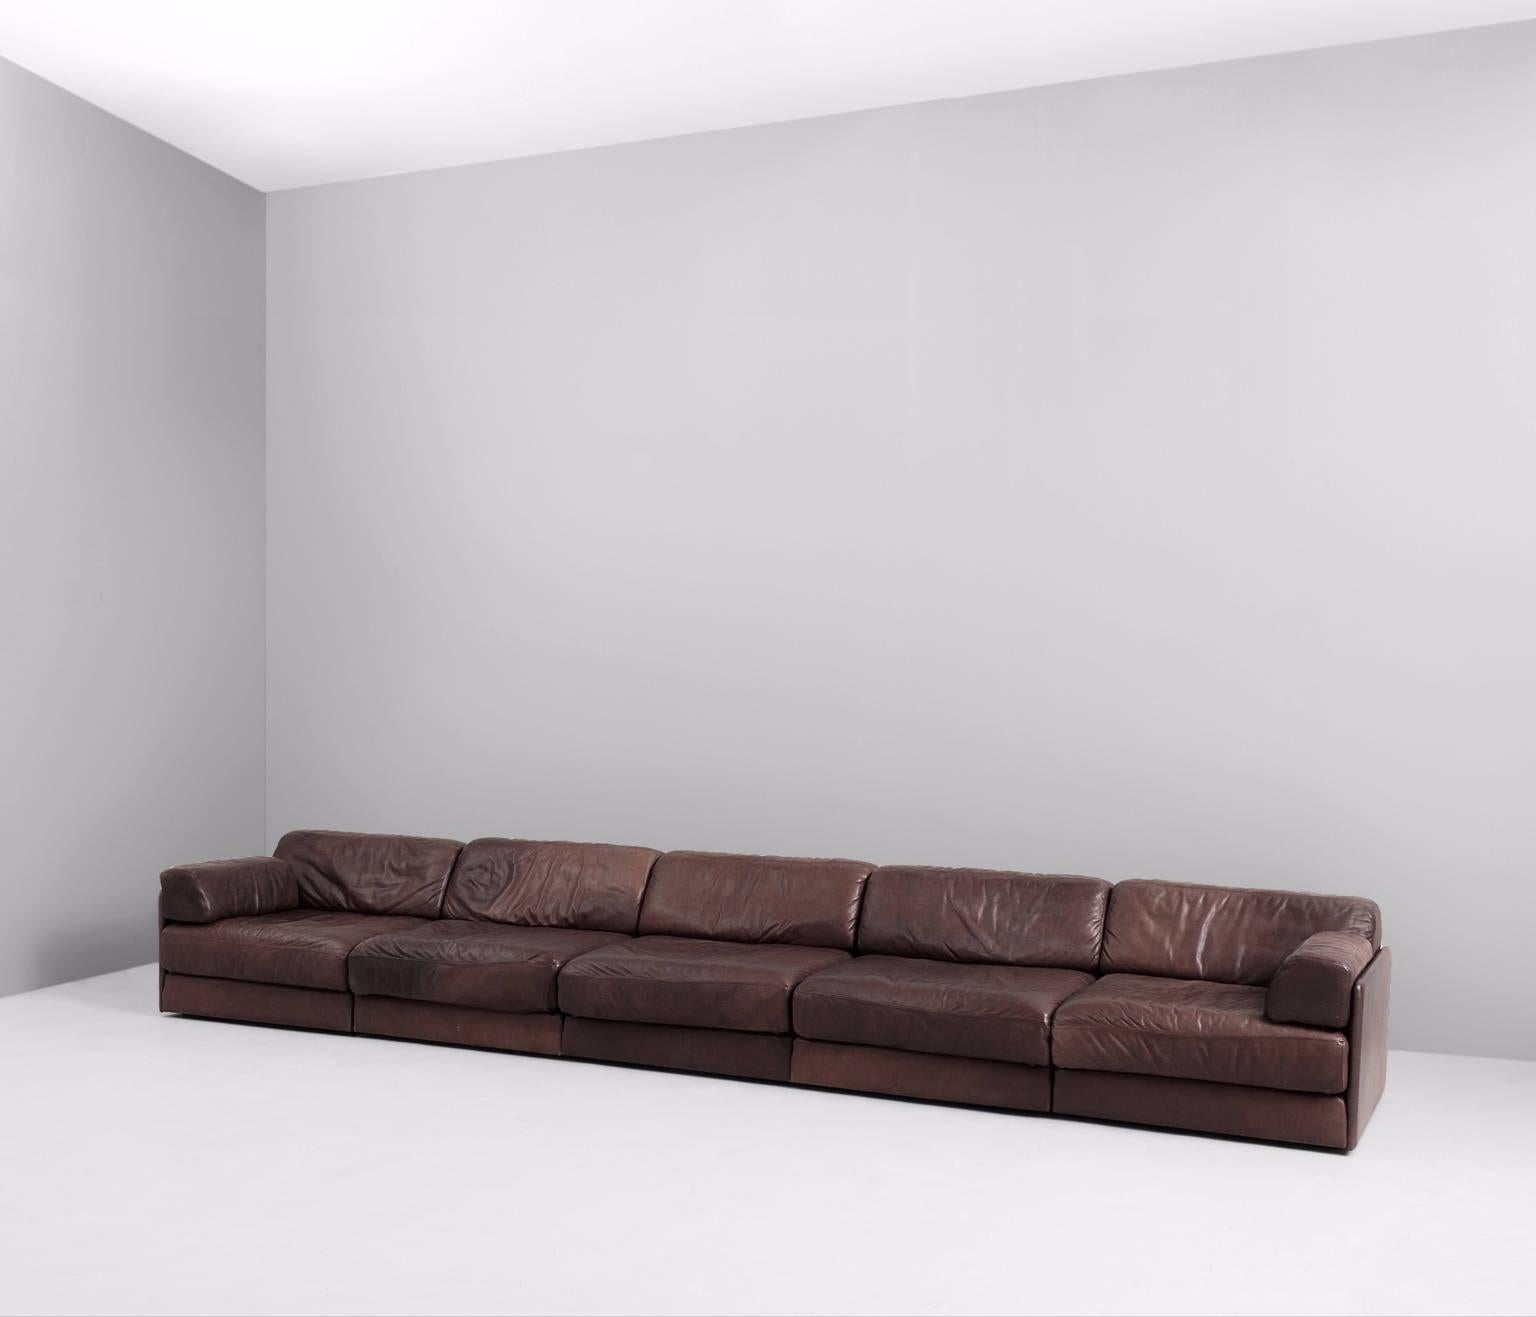 DS-76 modular sofa, leahter, De Sede, Switzerland 1970s.

Sectional sofa, consists of 7 elements, in dark brown leather. High quality sofa from de Swiss brand DeSede. Very comfortable and elegant. Due the modular pieces this is a highly versatile